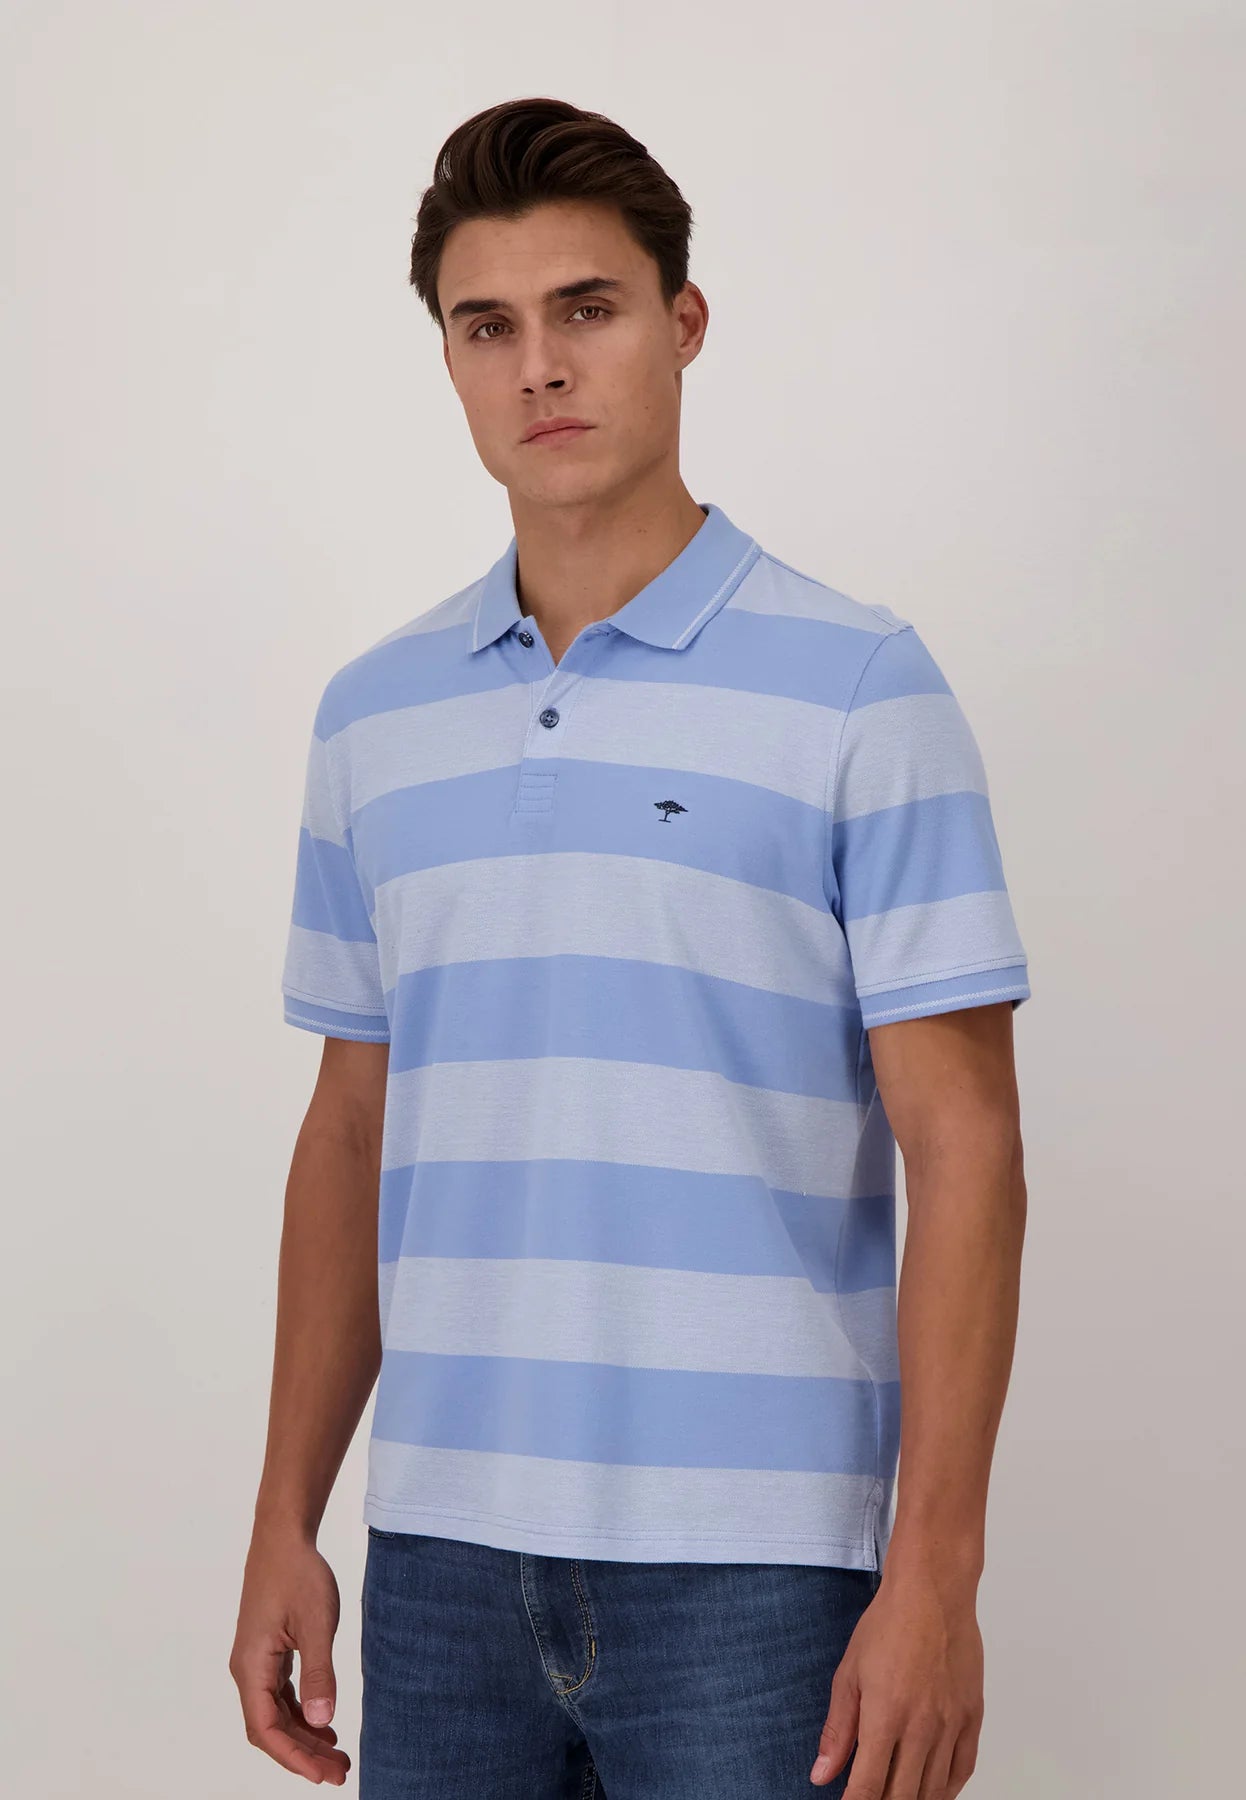 POLO SHIRT WITH BLOCK STRIPES